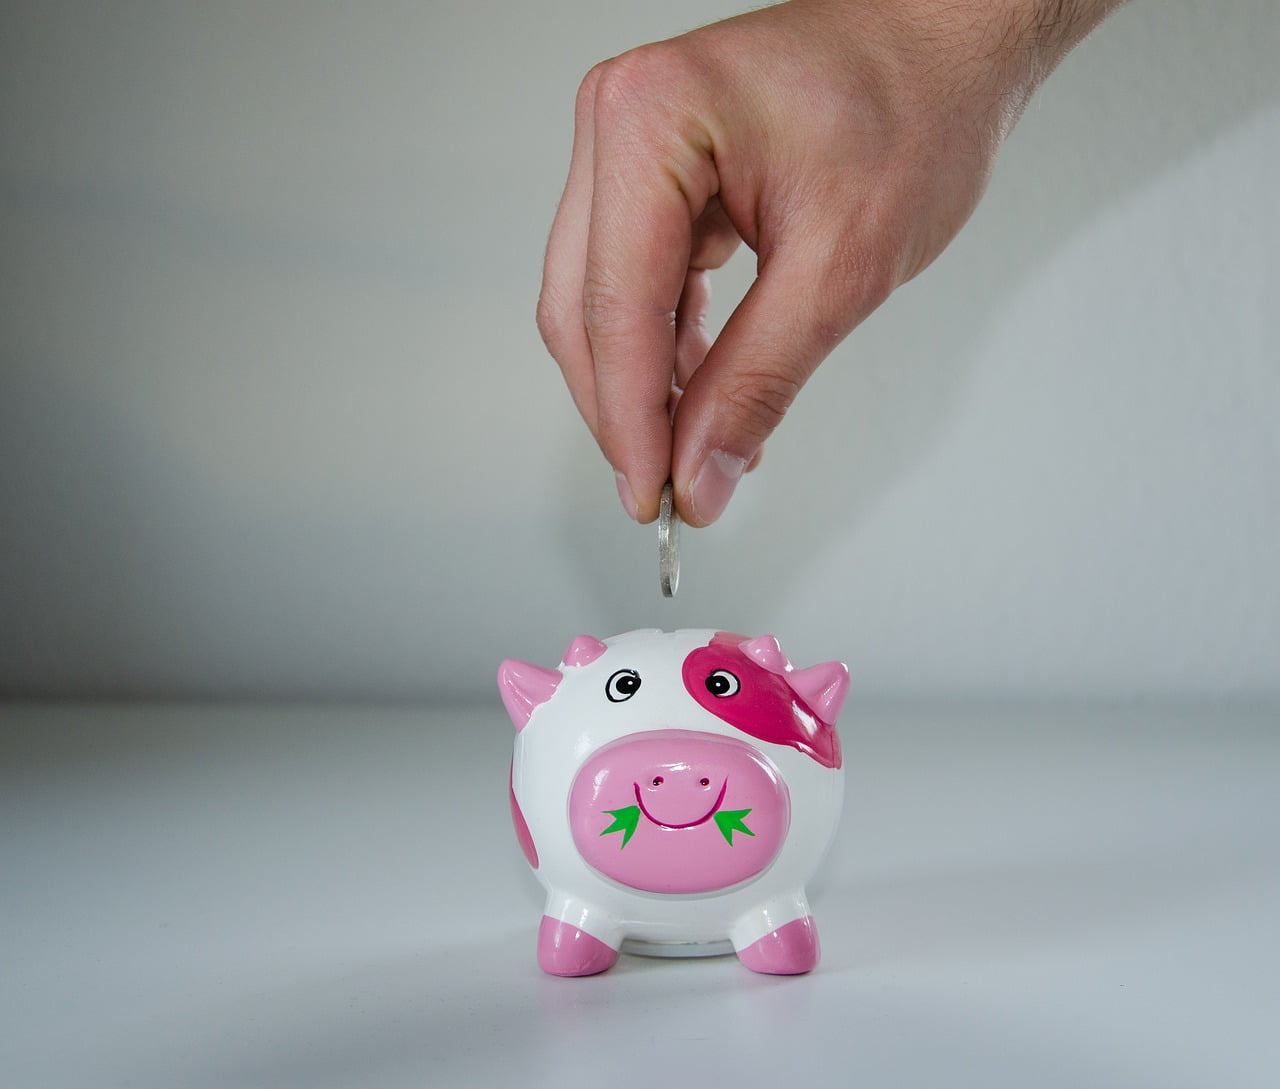 How Can I Save Money? Practical Tips and Strategies for Financial Success